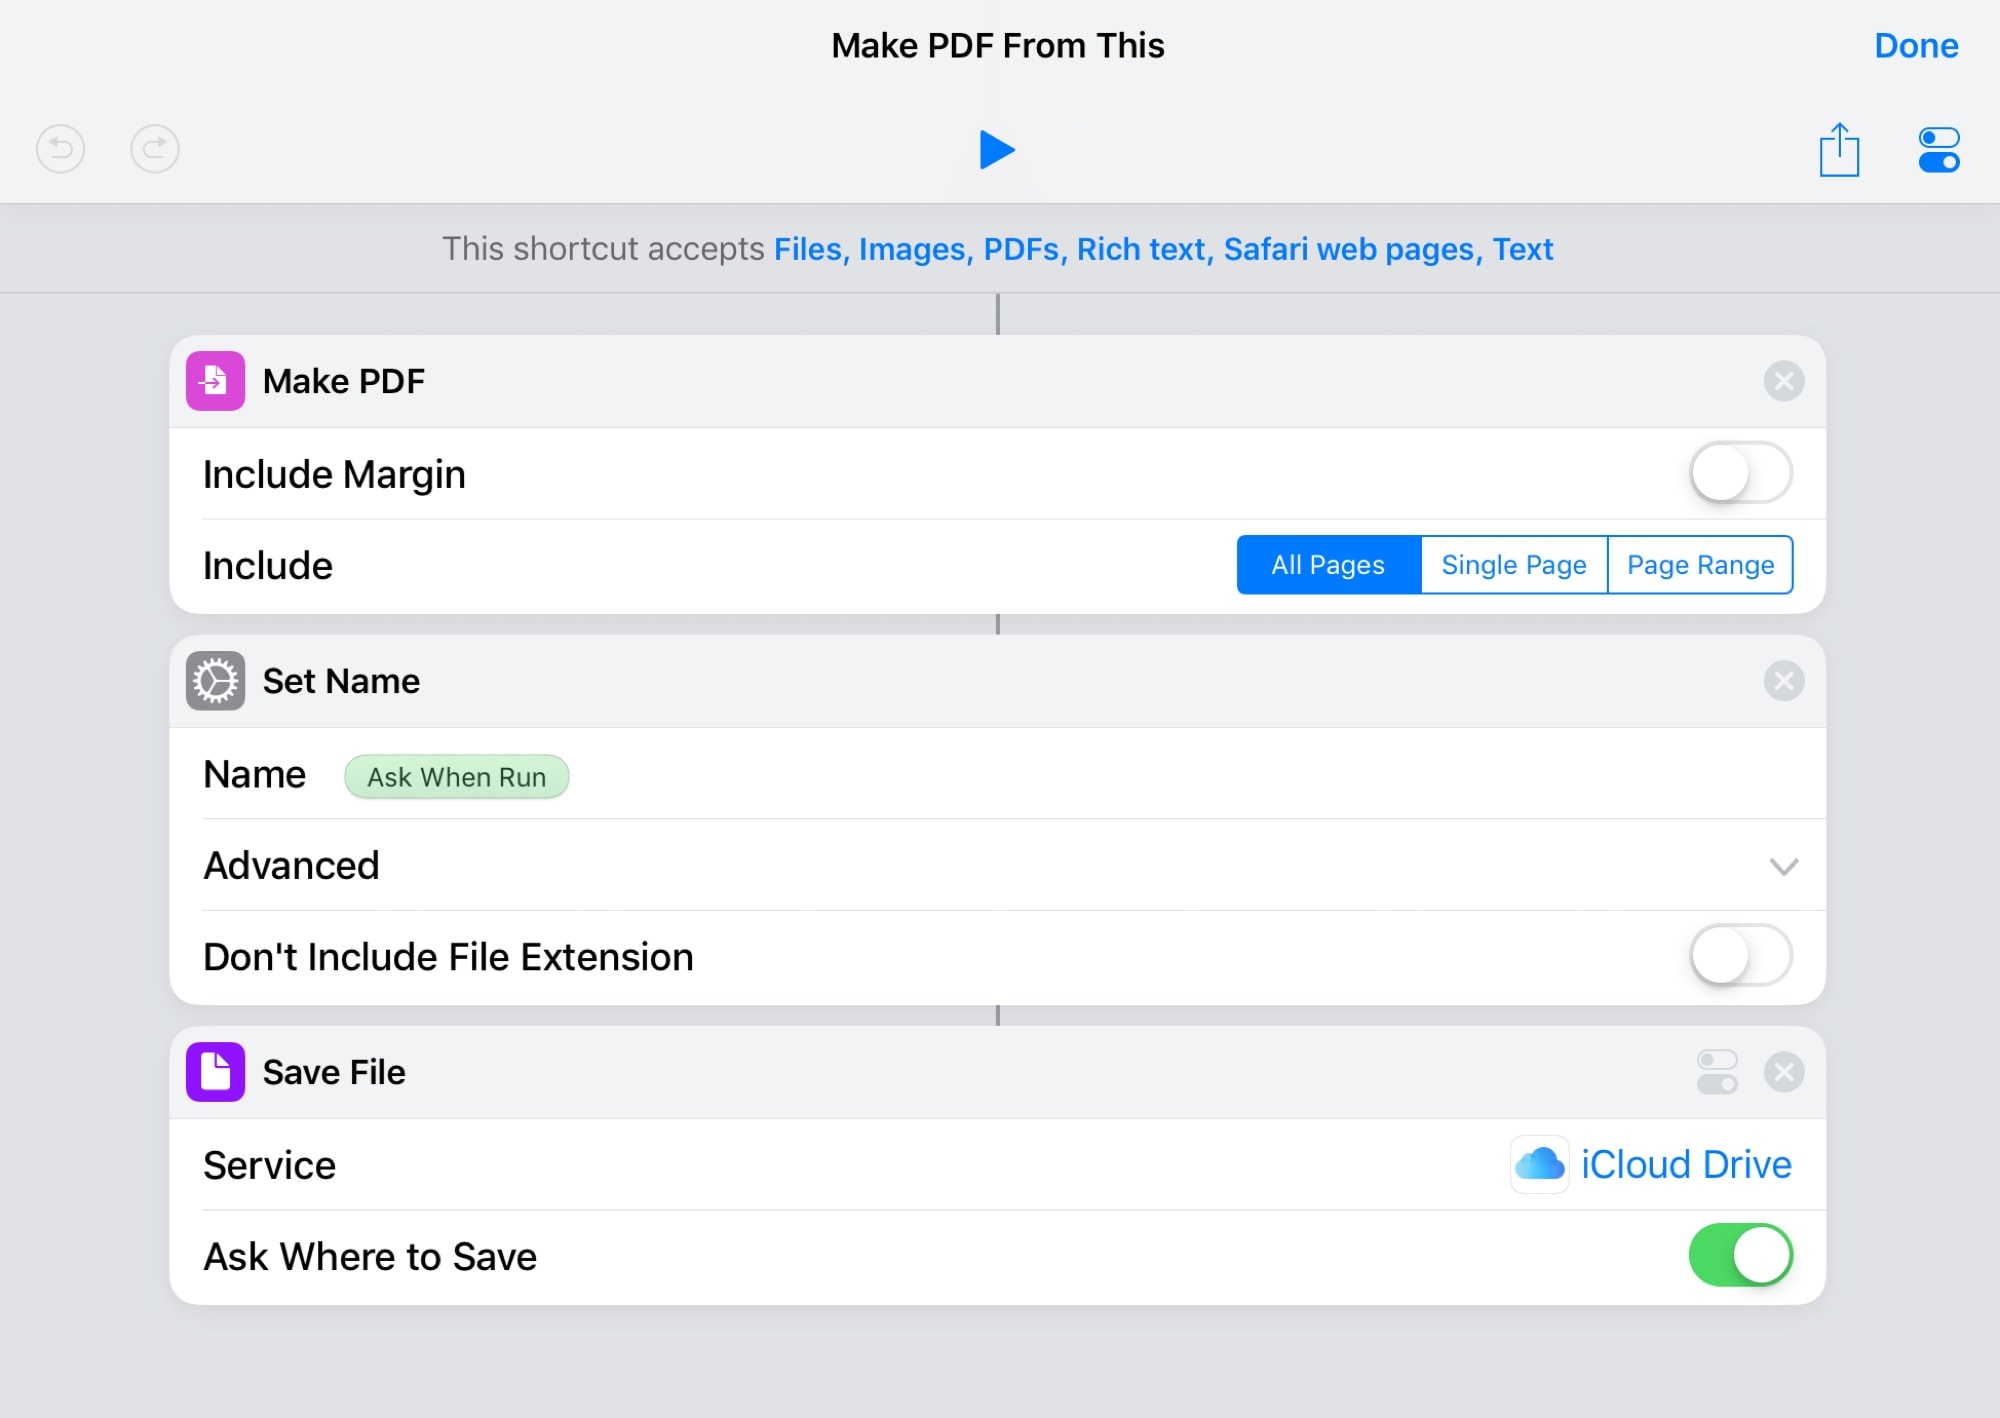 This shortcut combines multiple files into one PDF.